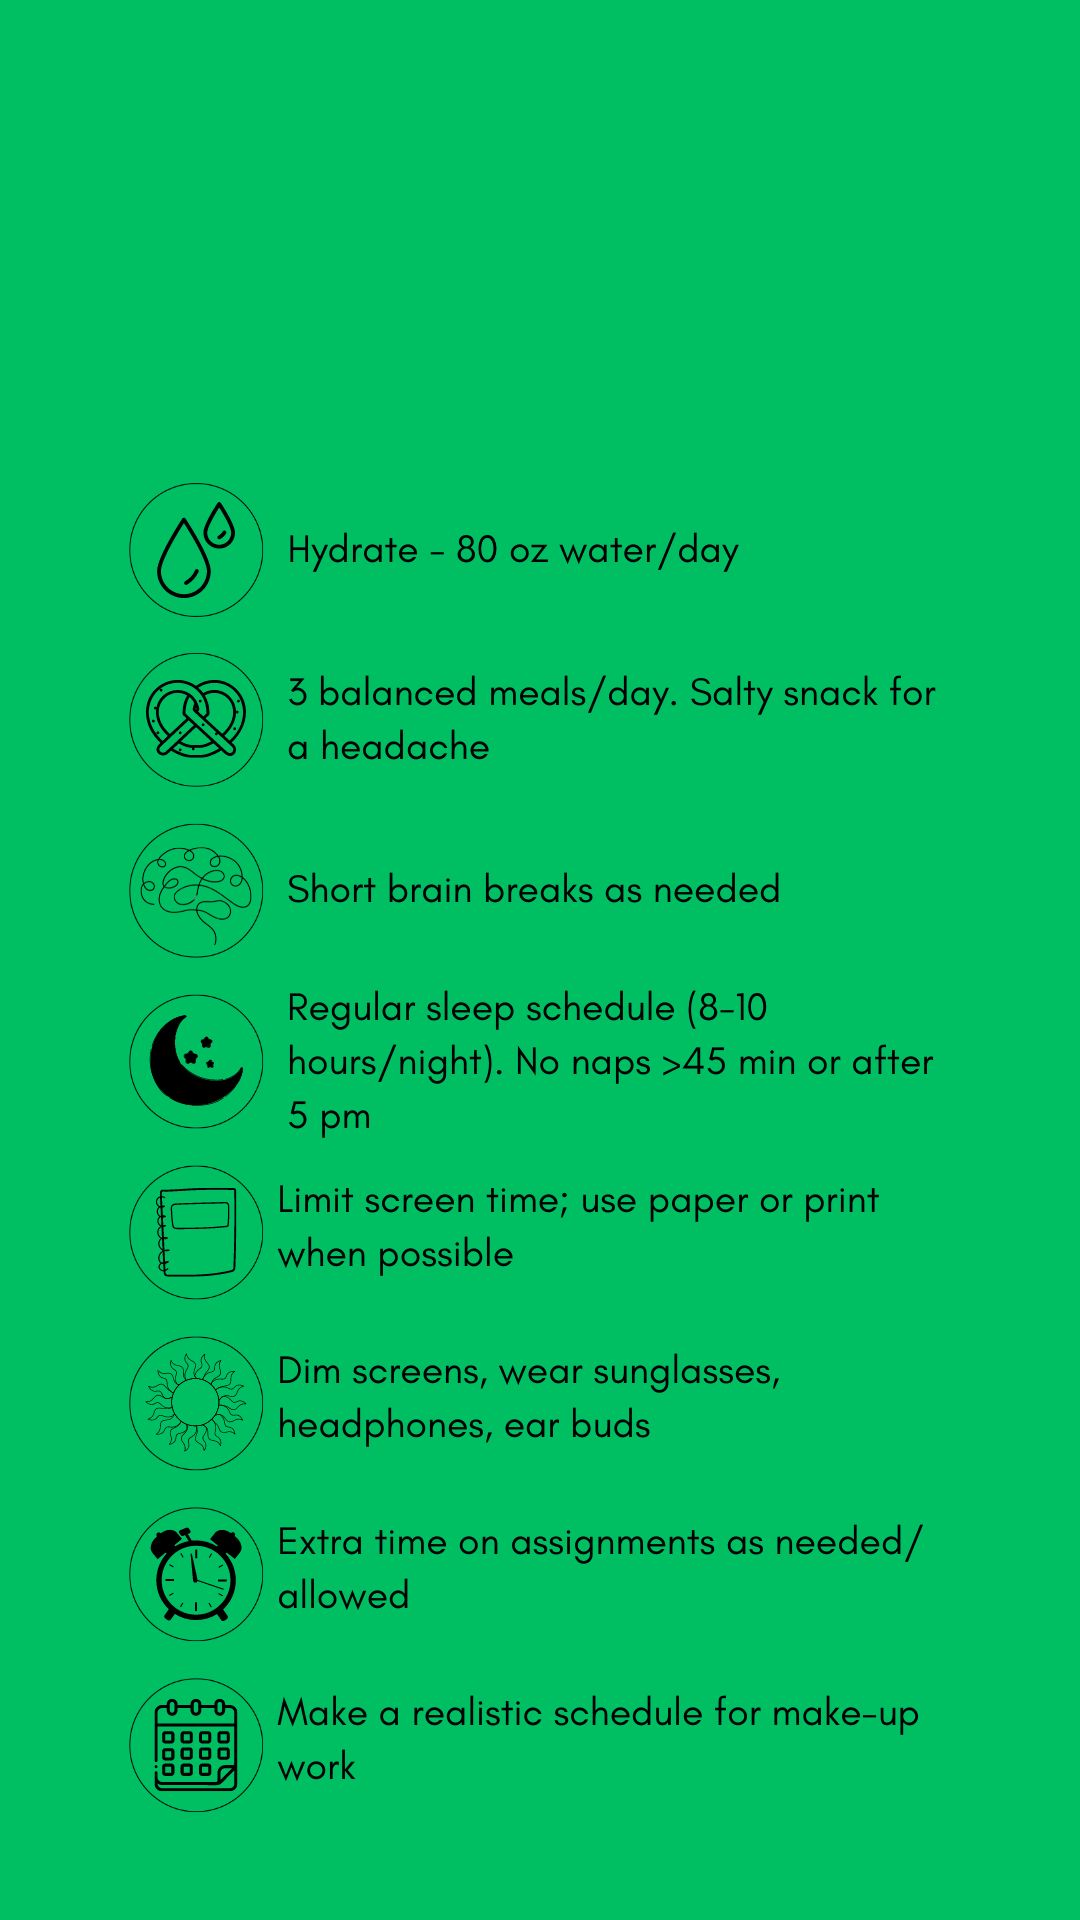 Black text and graphics with concussion treatment tips against a green backdrop. The tips include hydrate (80 oz. water/day). Eat 3 balanced meals/day, salt snack for headache. Short brain breaks as needed, Sleep time (8-10 hrs/night), no naps > 45 mins. or after 5 pm. Limit screens, use paper/print. when possible .Dim screens. wear sunglasses, headphones, earbuds. Allow extra time on assignments as allowed. Pace yourself. Make a realistic schedule for make-up work.